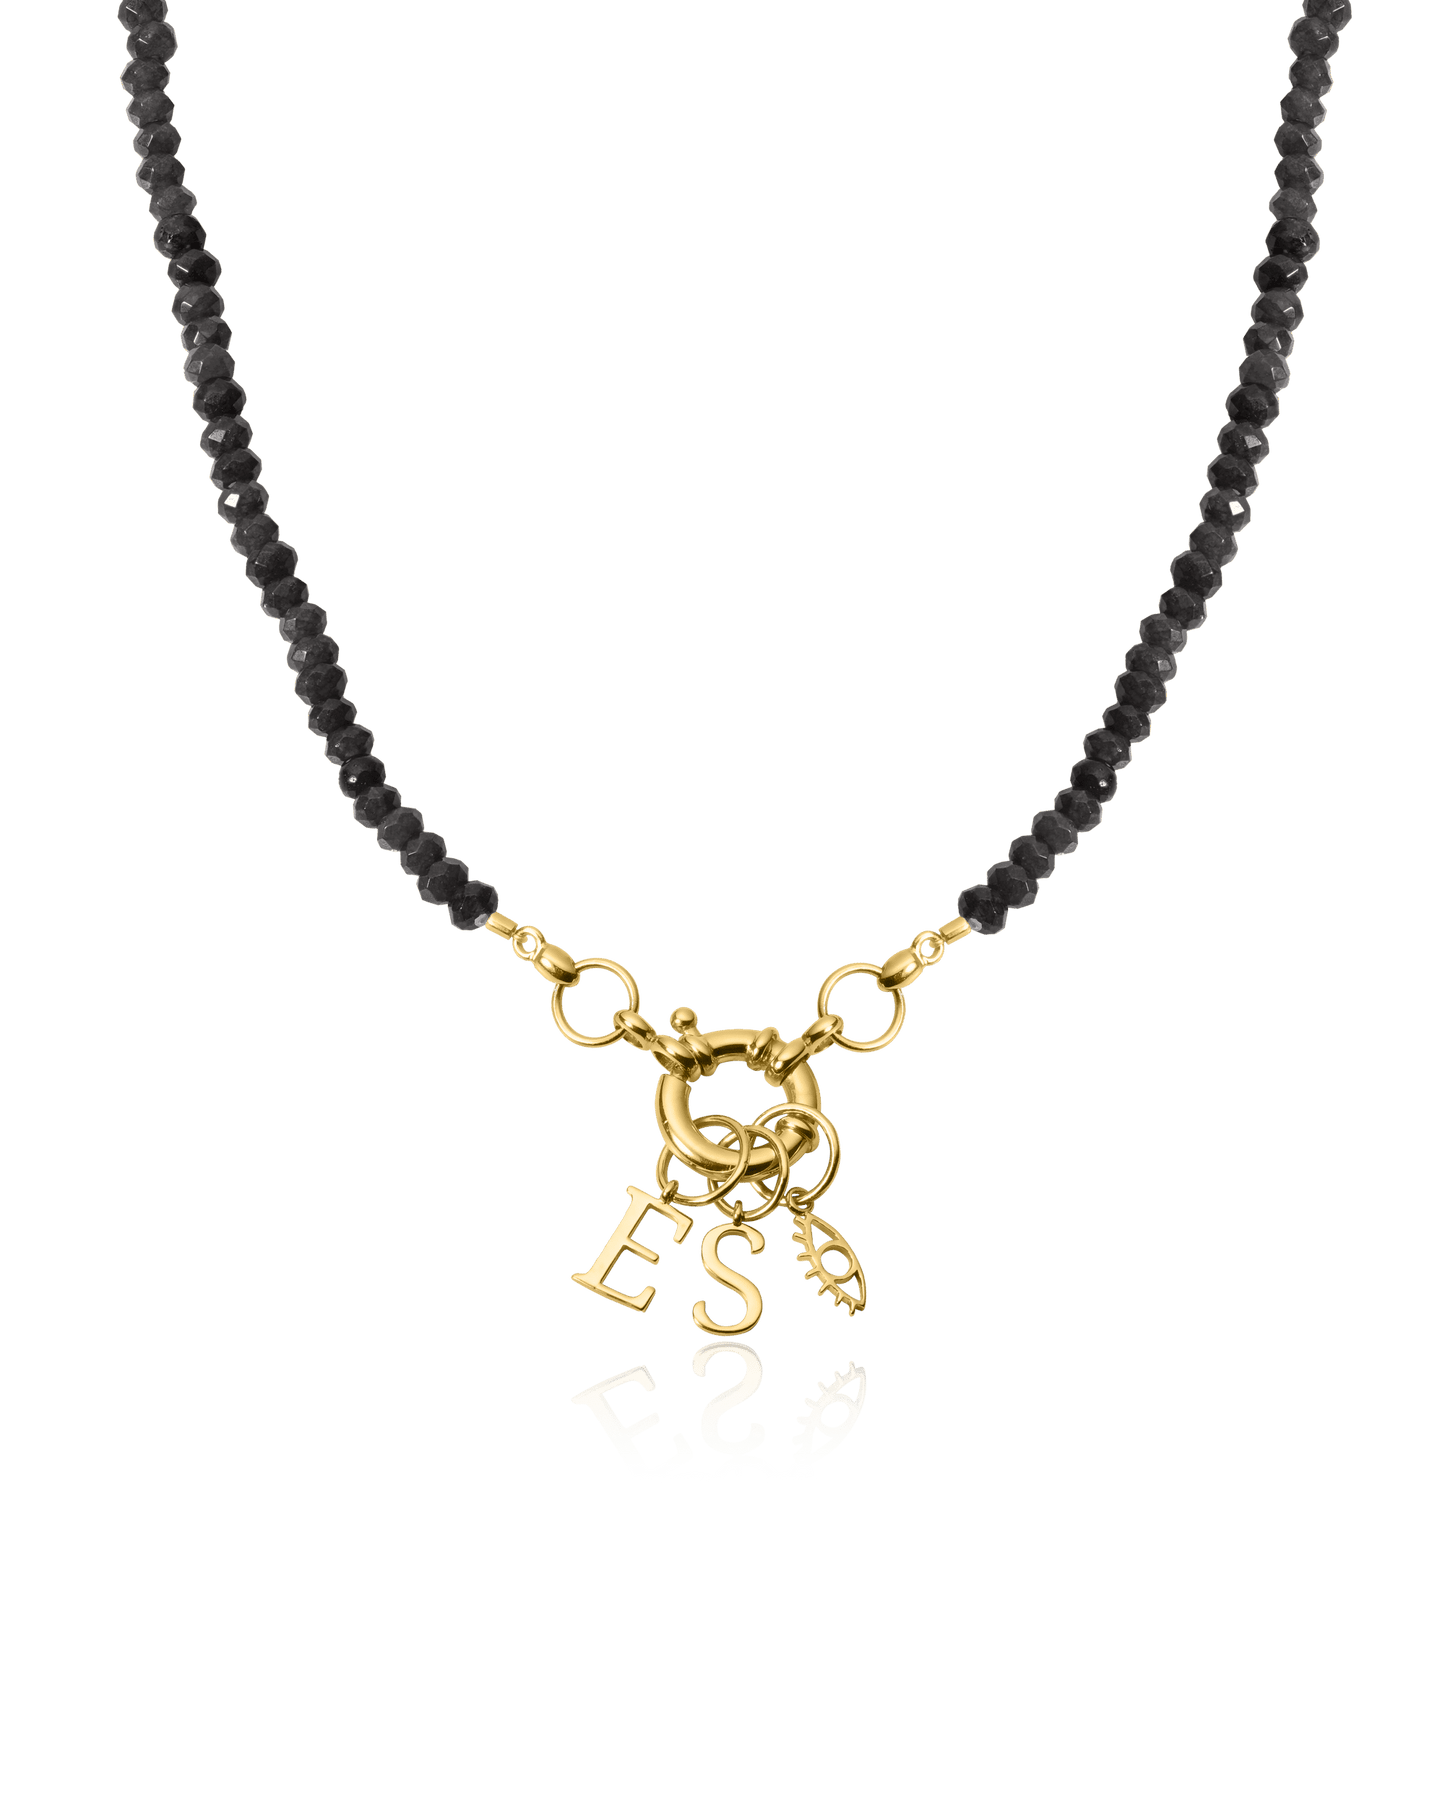 Watermelon Charm Lock Necklace - 18K Gold Vermeil Necklaces magal-dev Glass Beads Black Spinnel 1 Charm 16"